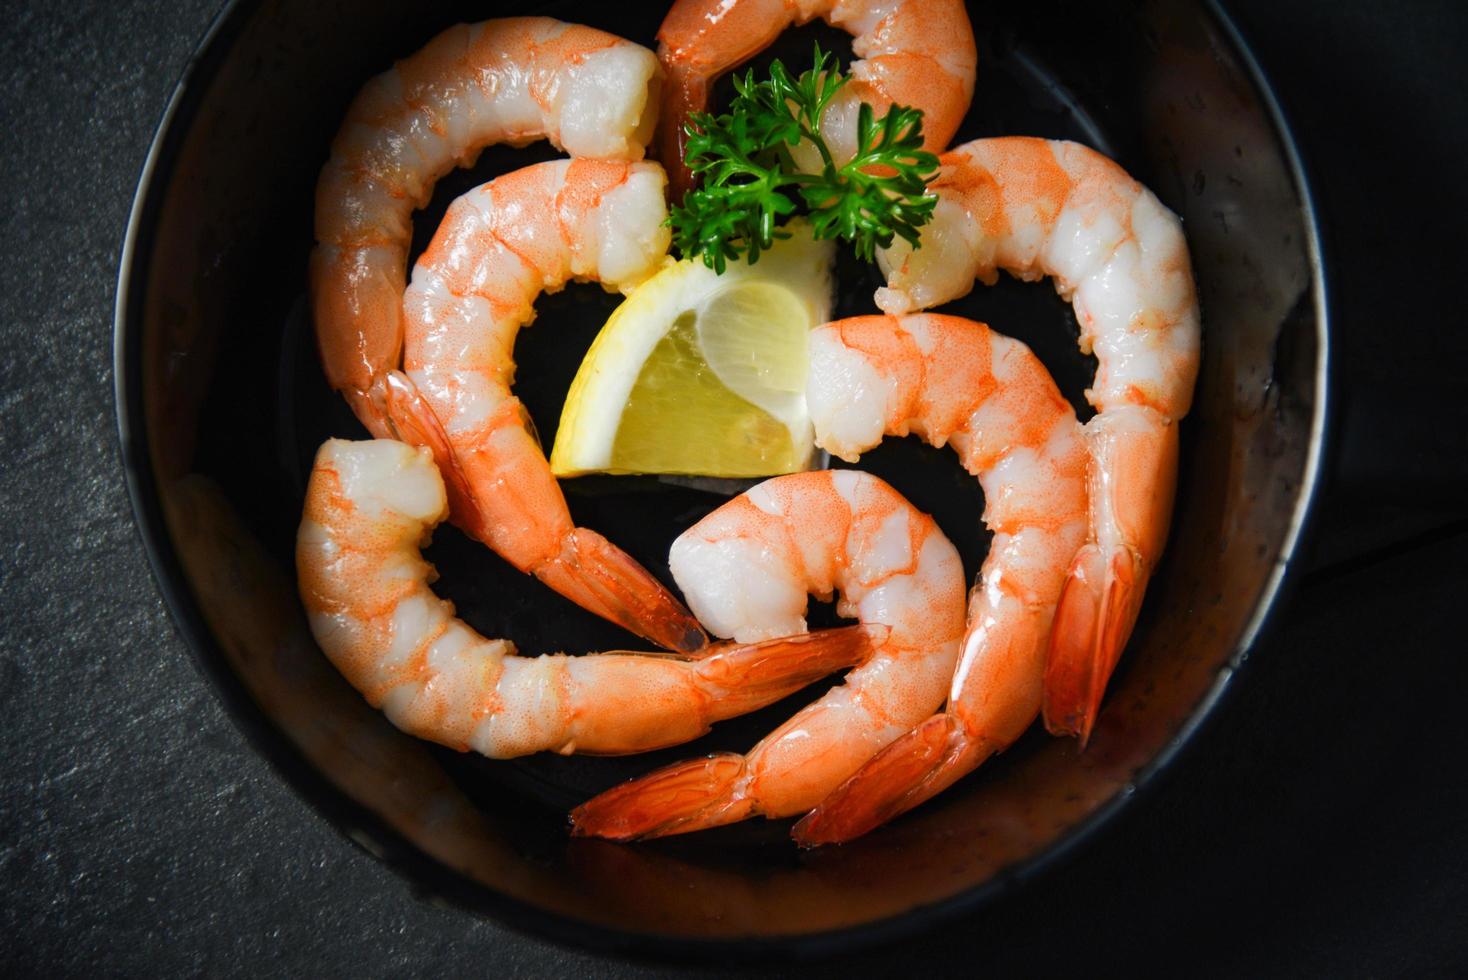 Shrimps prawns seafood plate cooked on pan with herbs and spices lemon and curly parsley photo